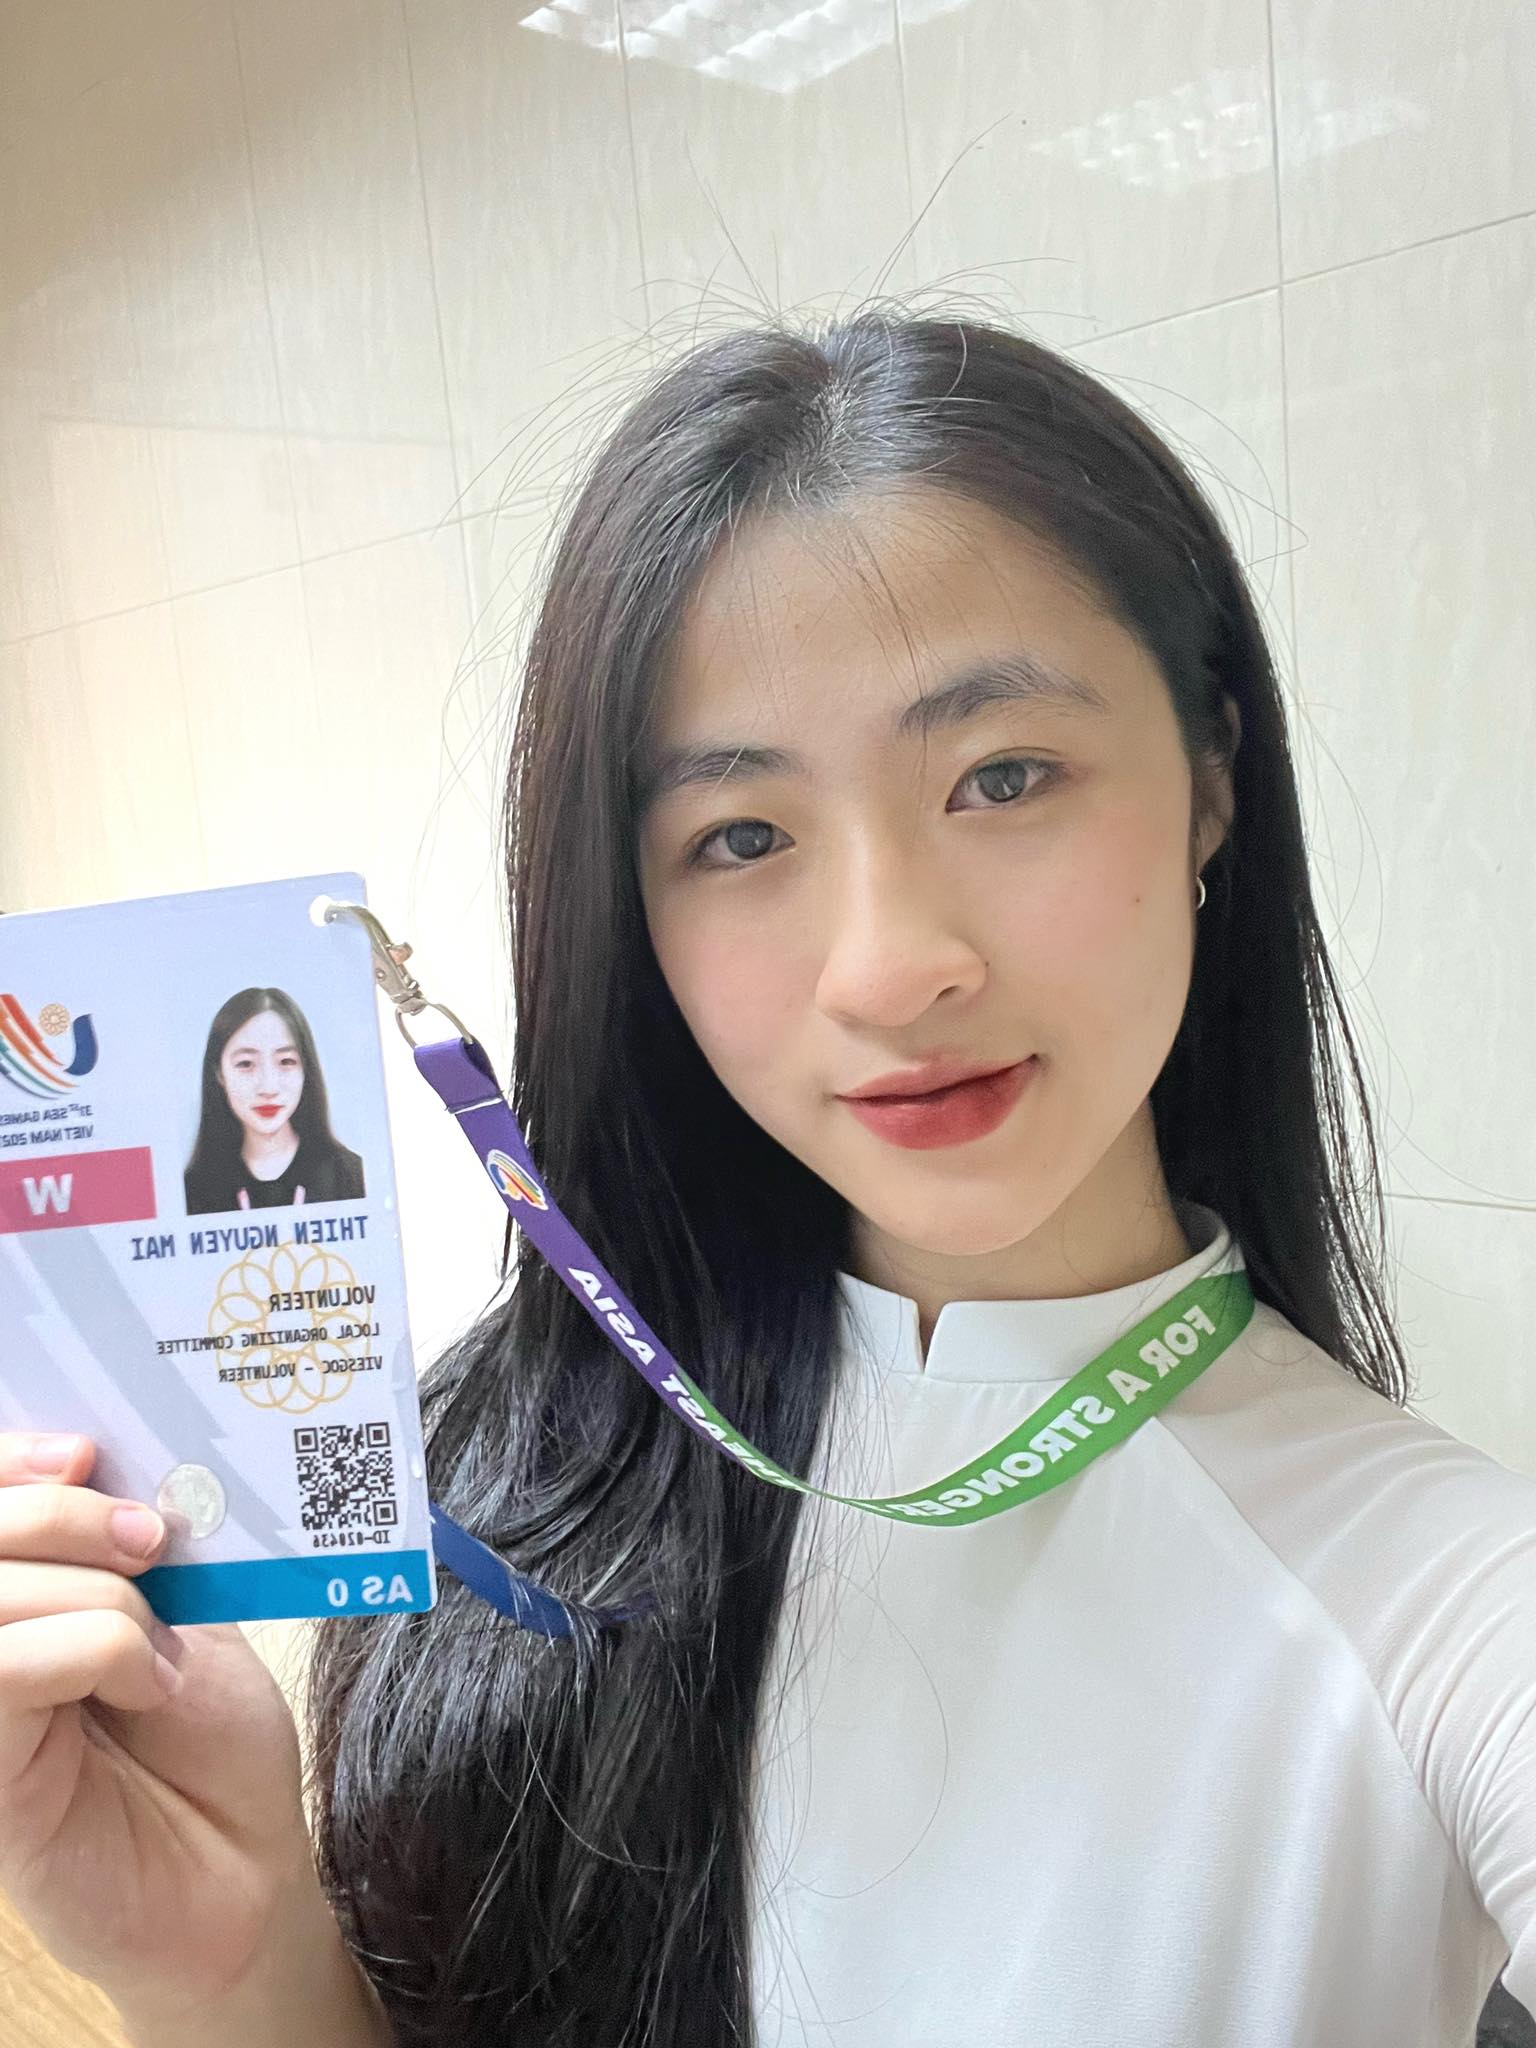 Meet the beautiful female SEA Games volunteer who caused a fever on social media: Born in 2003, passed 2 universities and is extremely multi-talented - Photo 4.